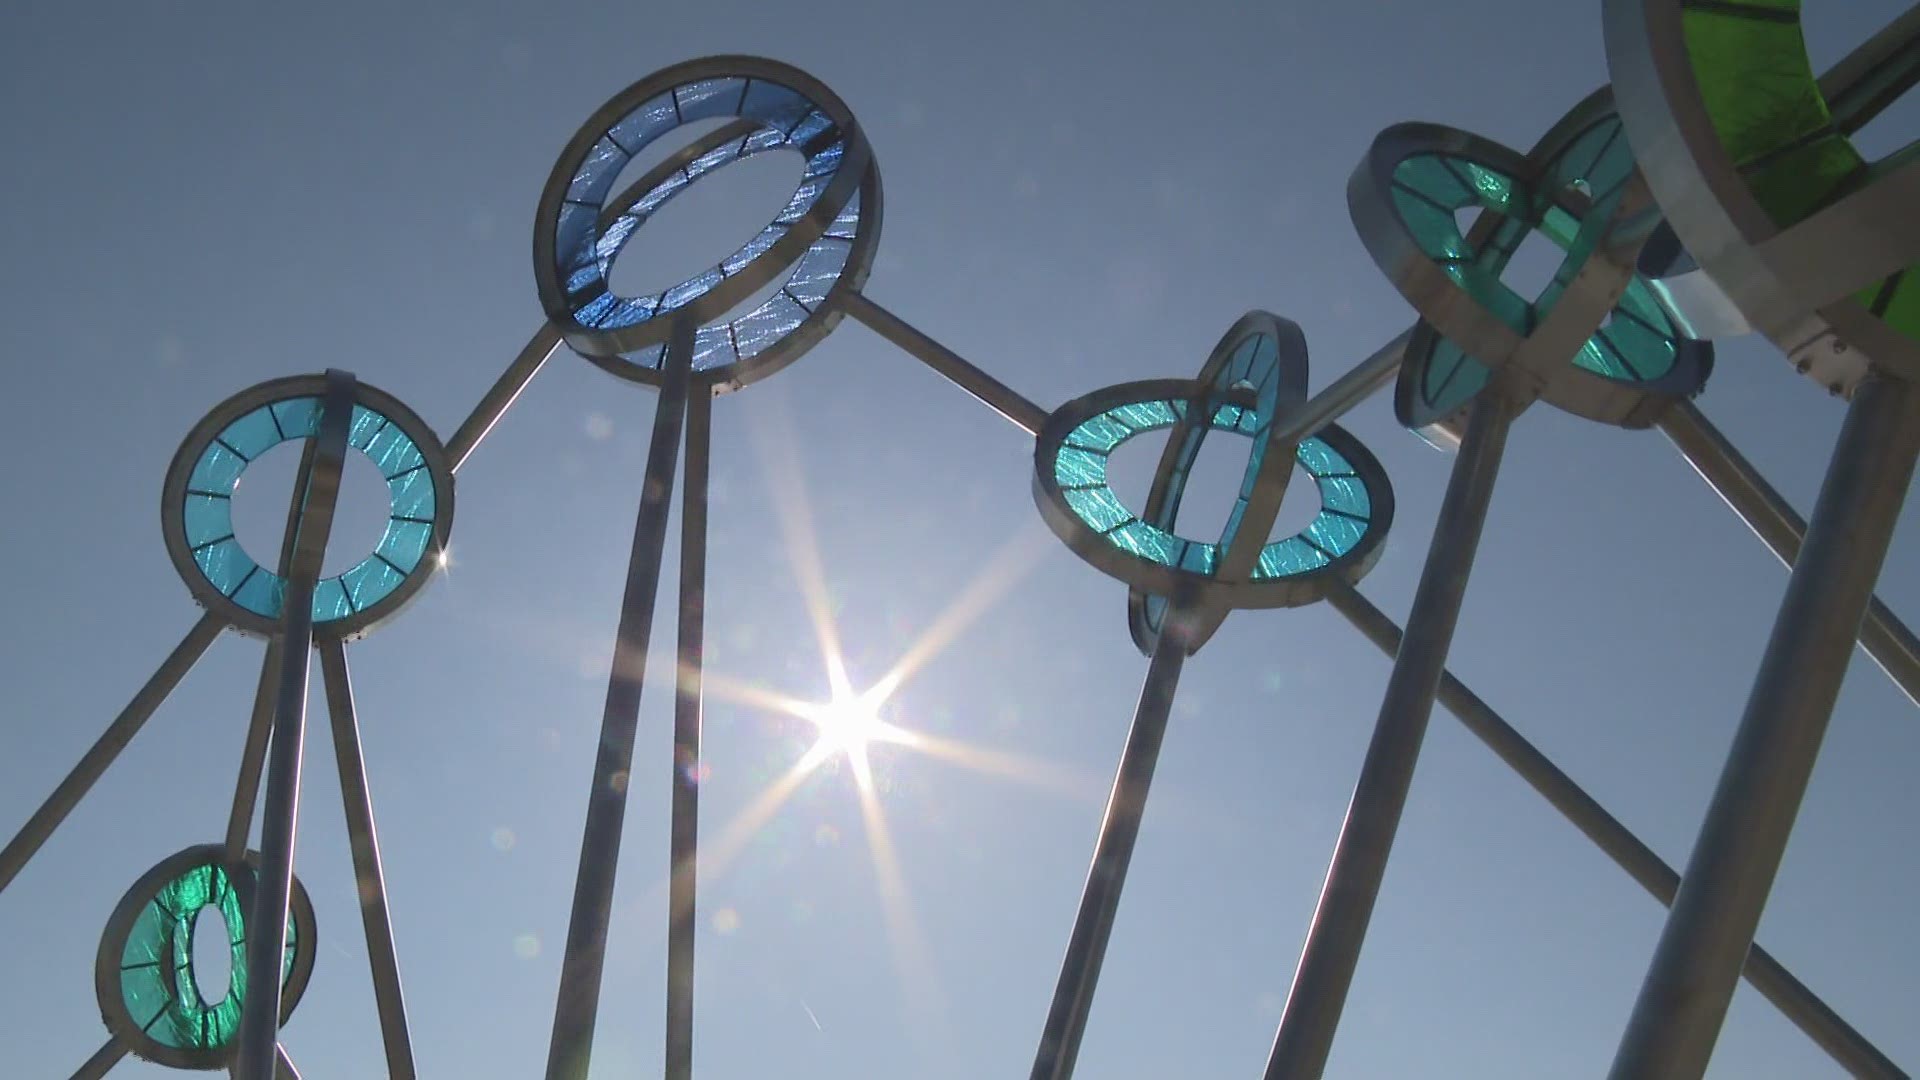 The 20-foot sculpture is in the round-a-bout at the corner of Lakeshore and Beach Street